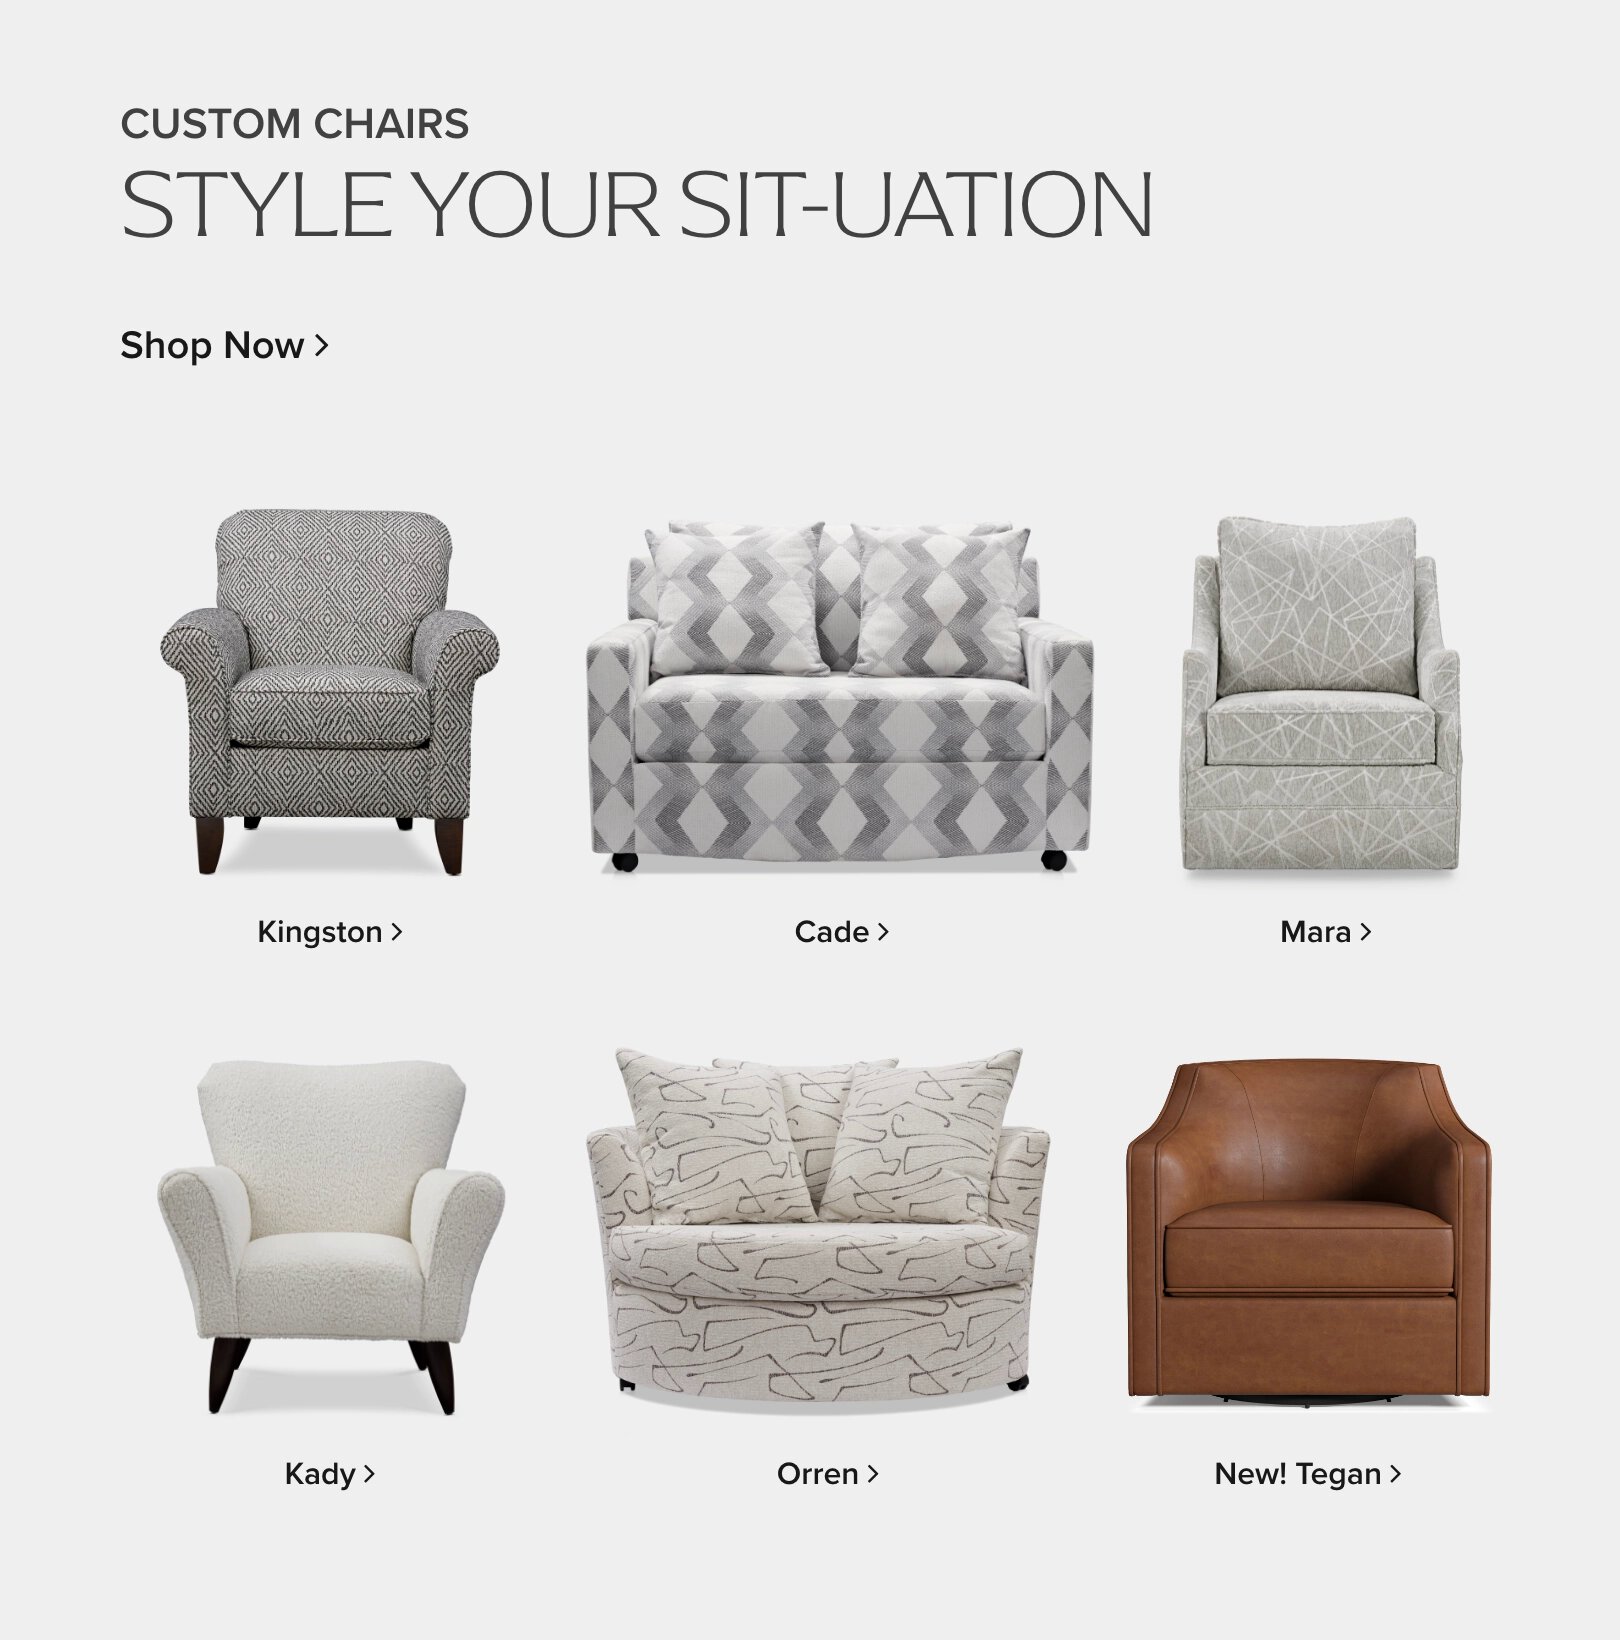 custom chairs, style your sit-uation